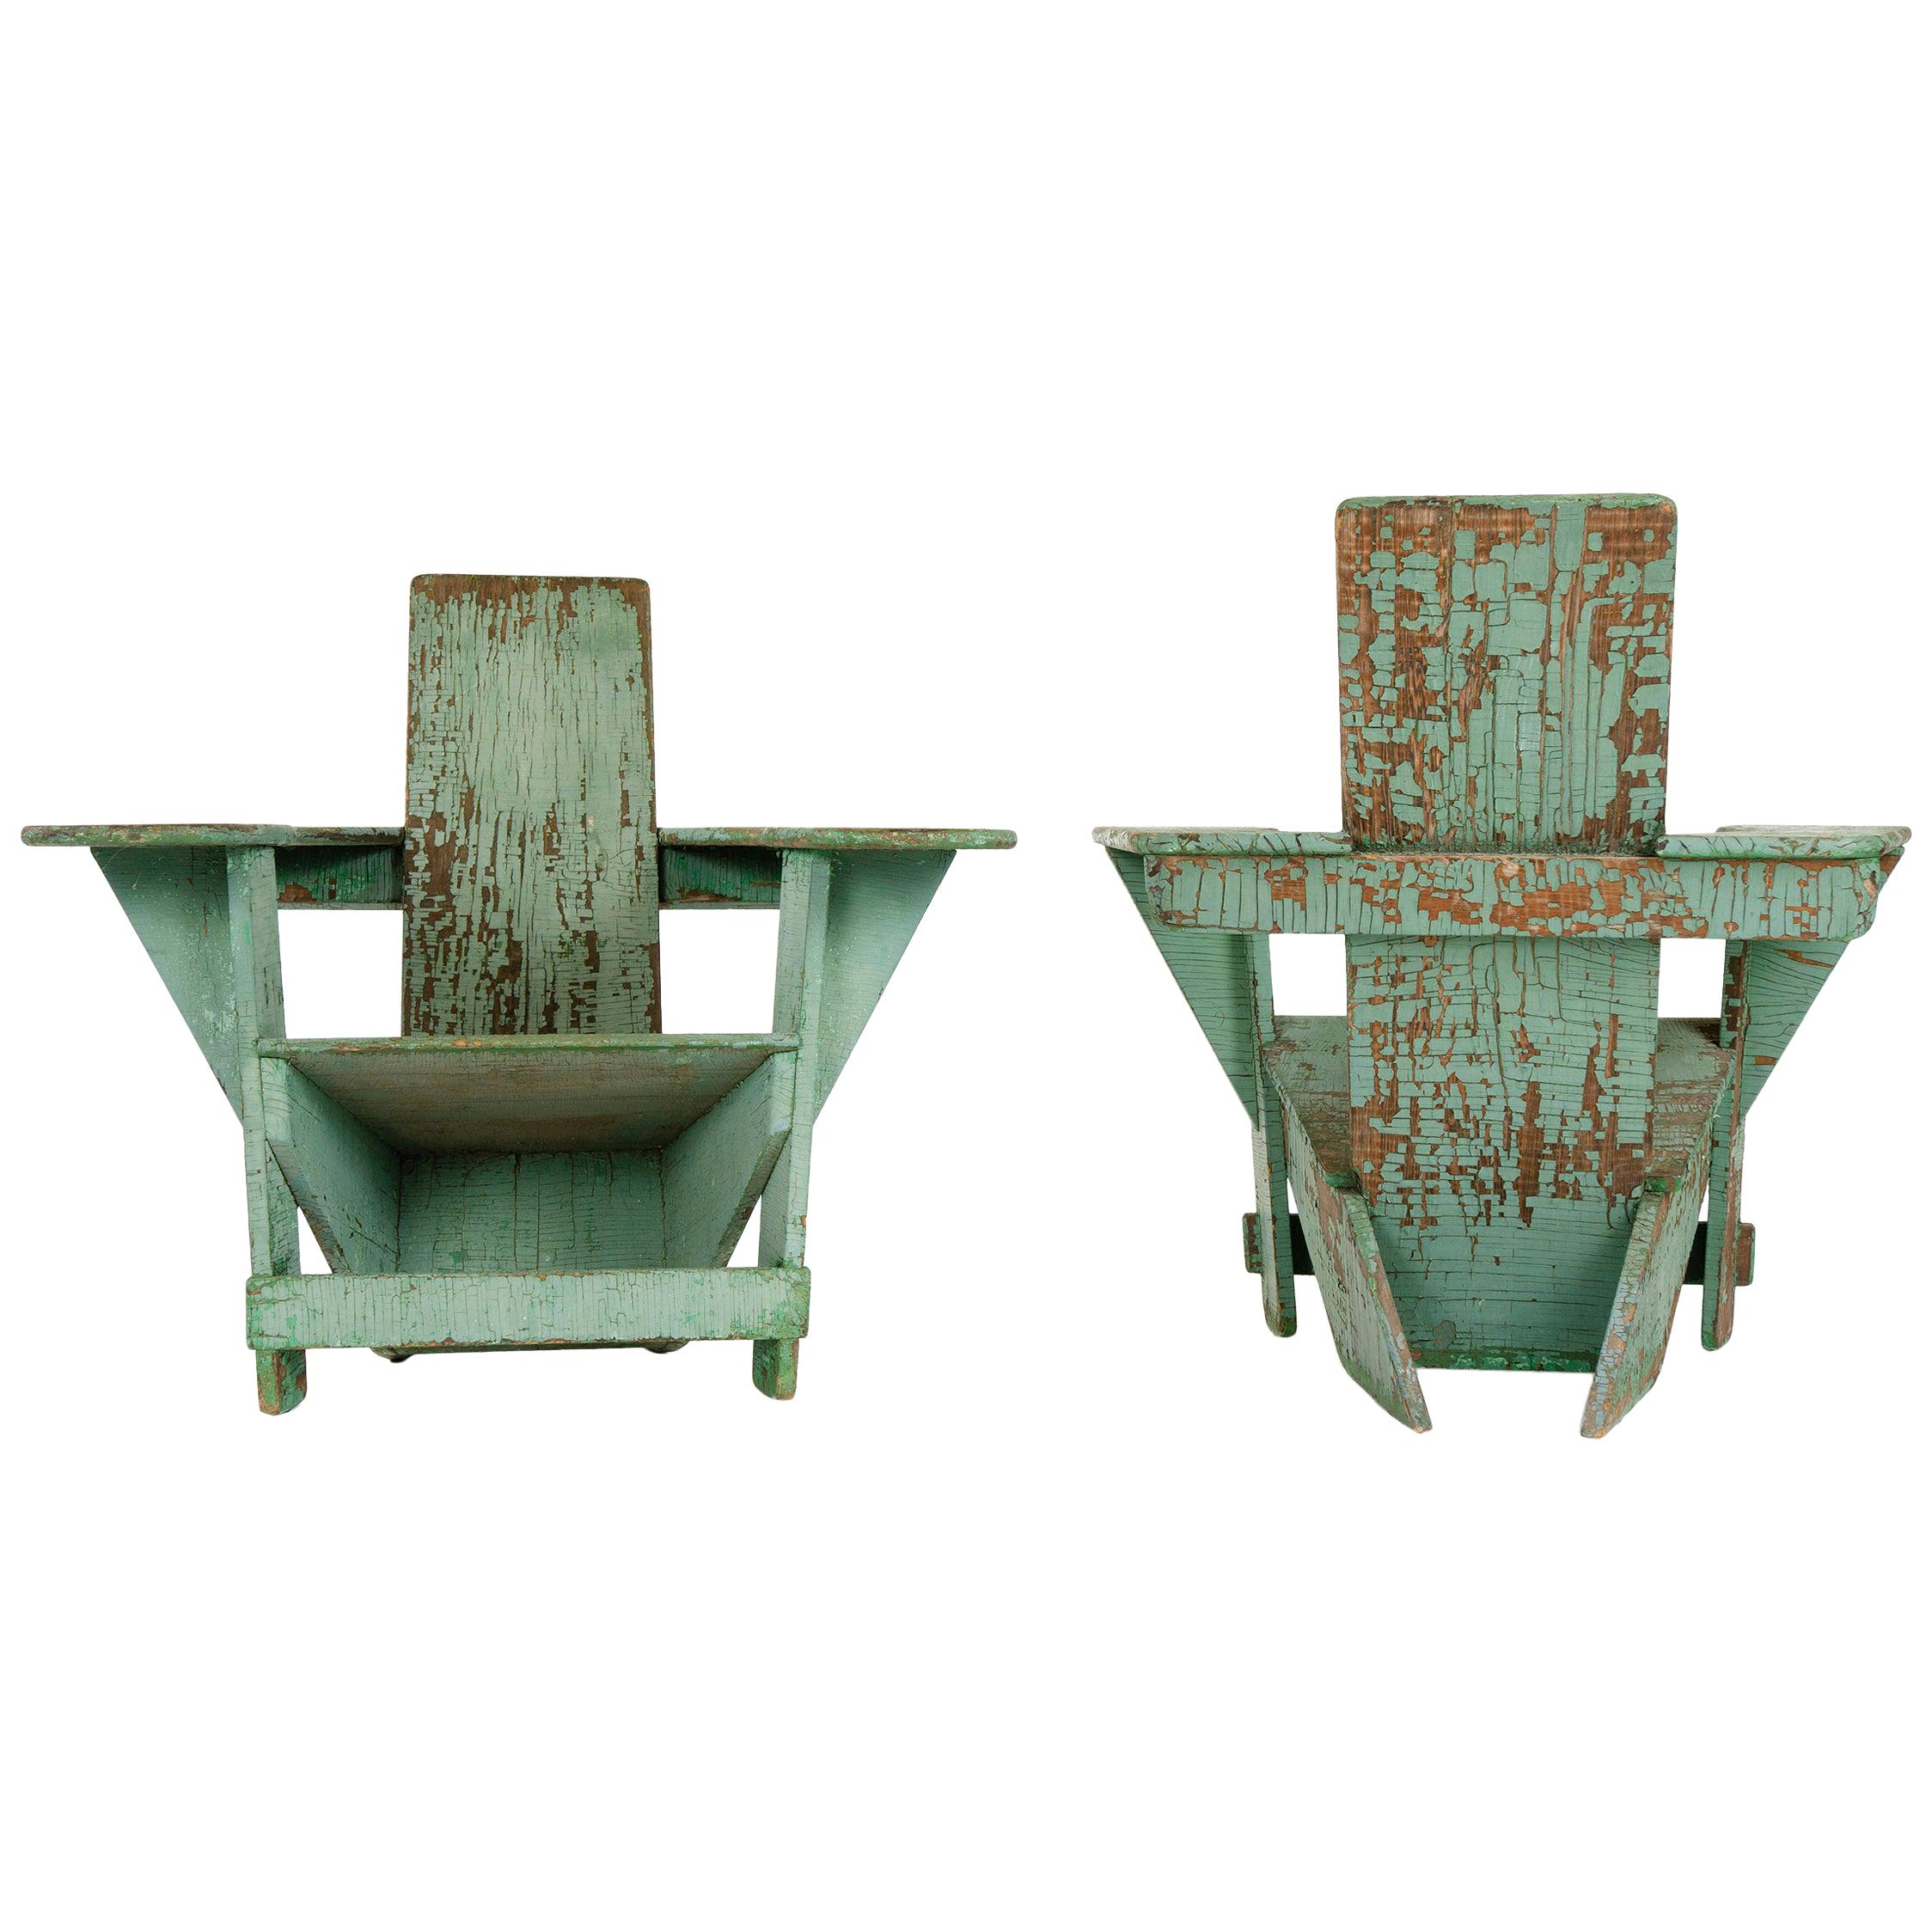 1910s Pair of Westport Chairs by Thomas Lee for Harry Bunnell